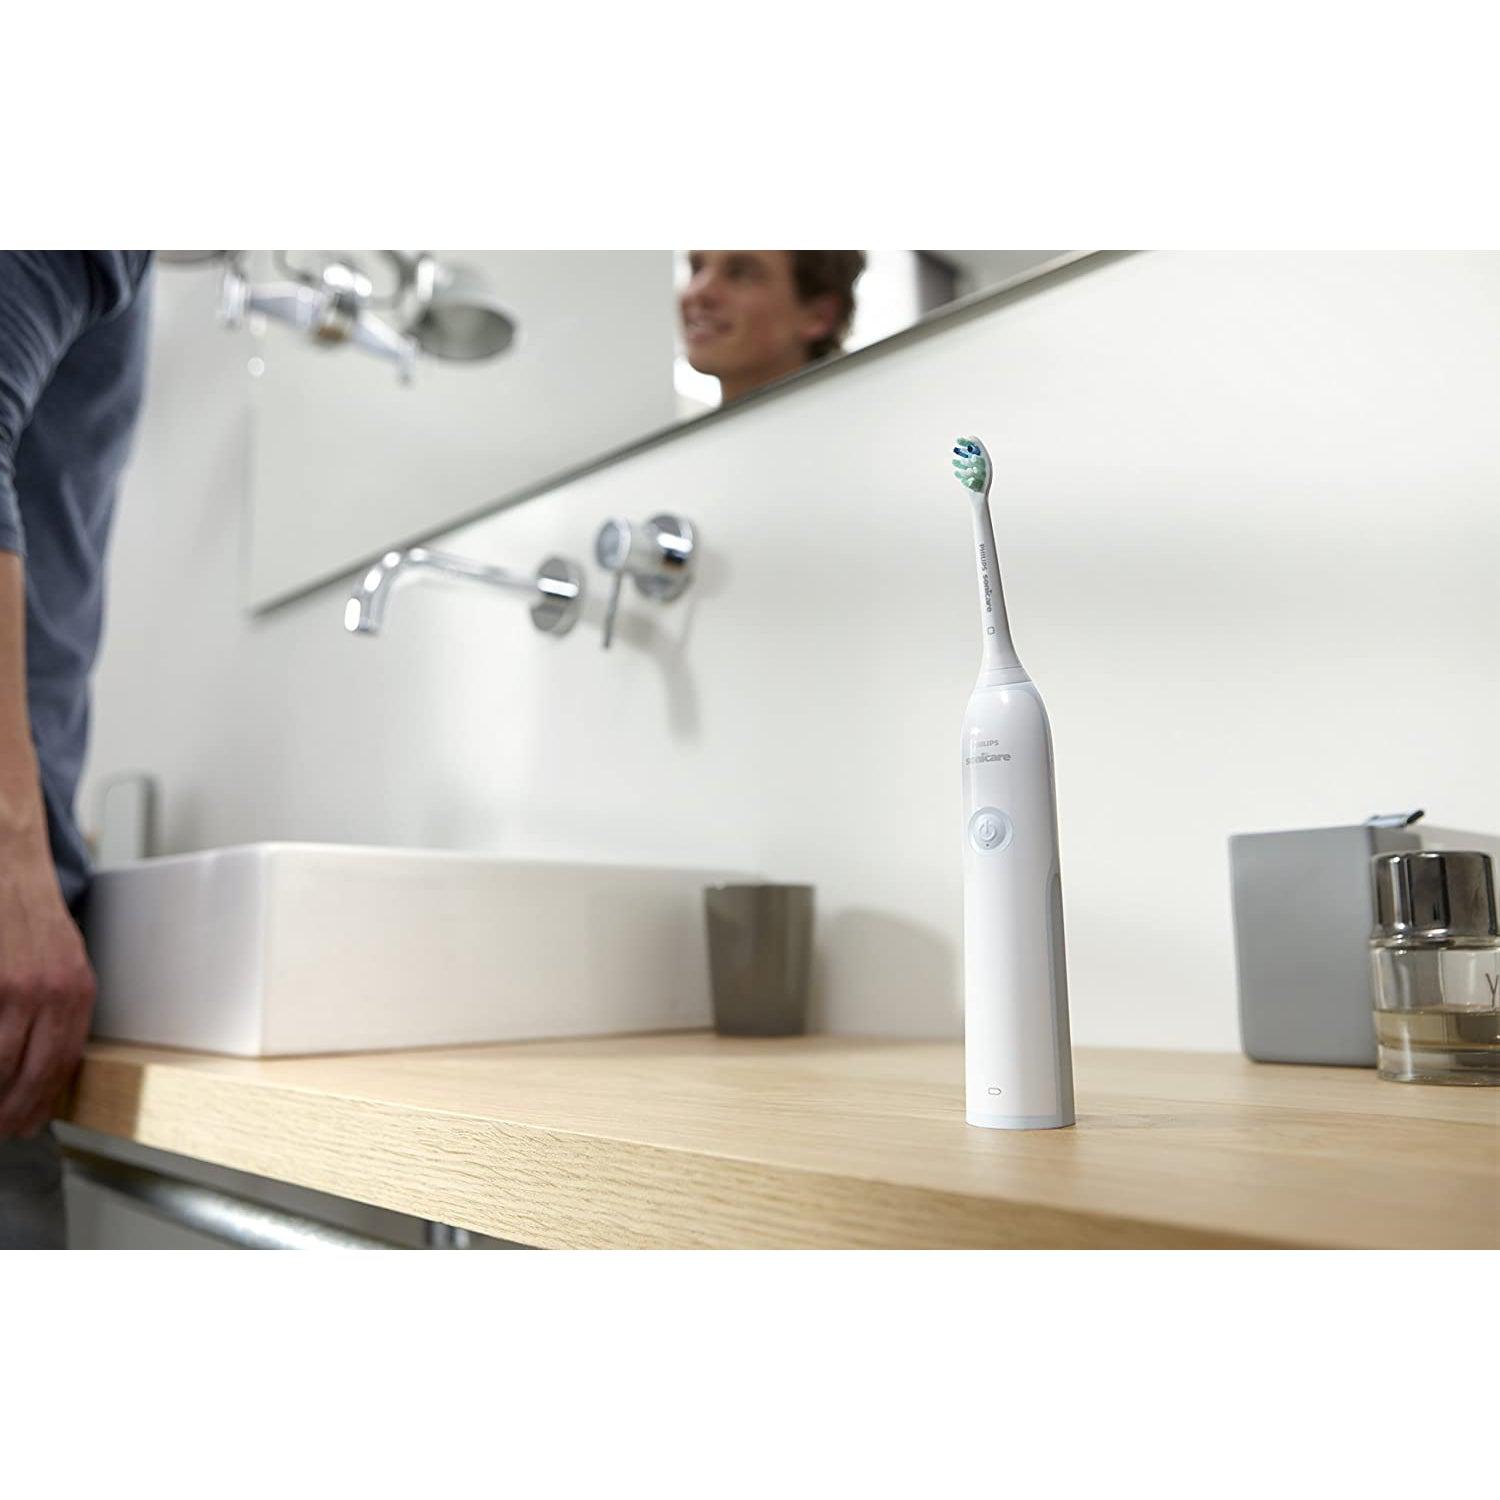 Philips Sonicare Clean Care HX3212/03 – Electric Toothbrush, Anti Plaque Defence -white and light blue - Healthxpress.ie